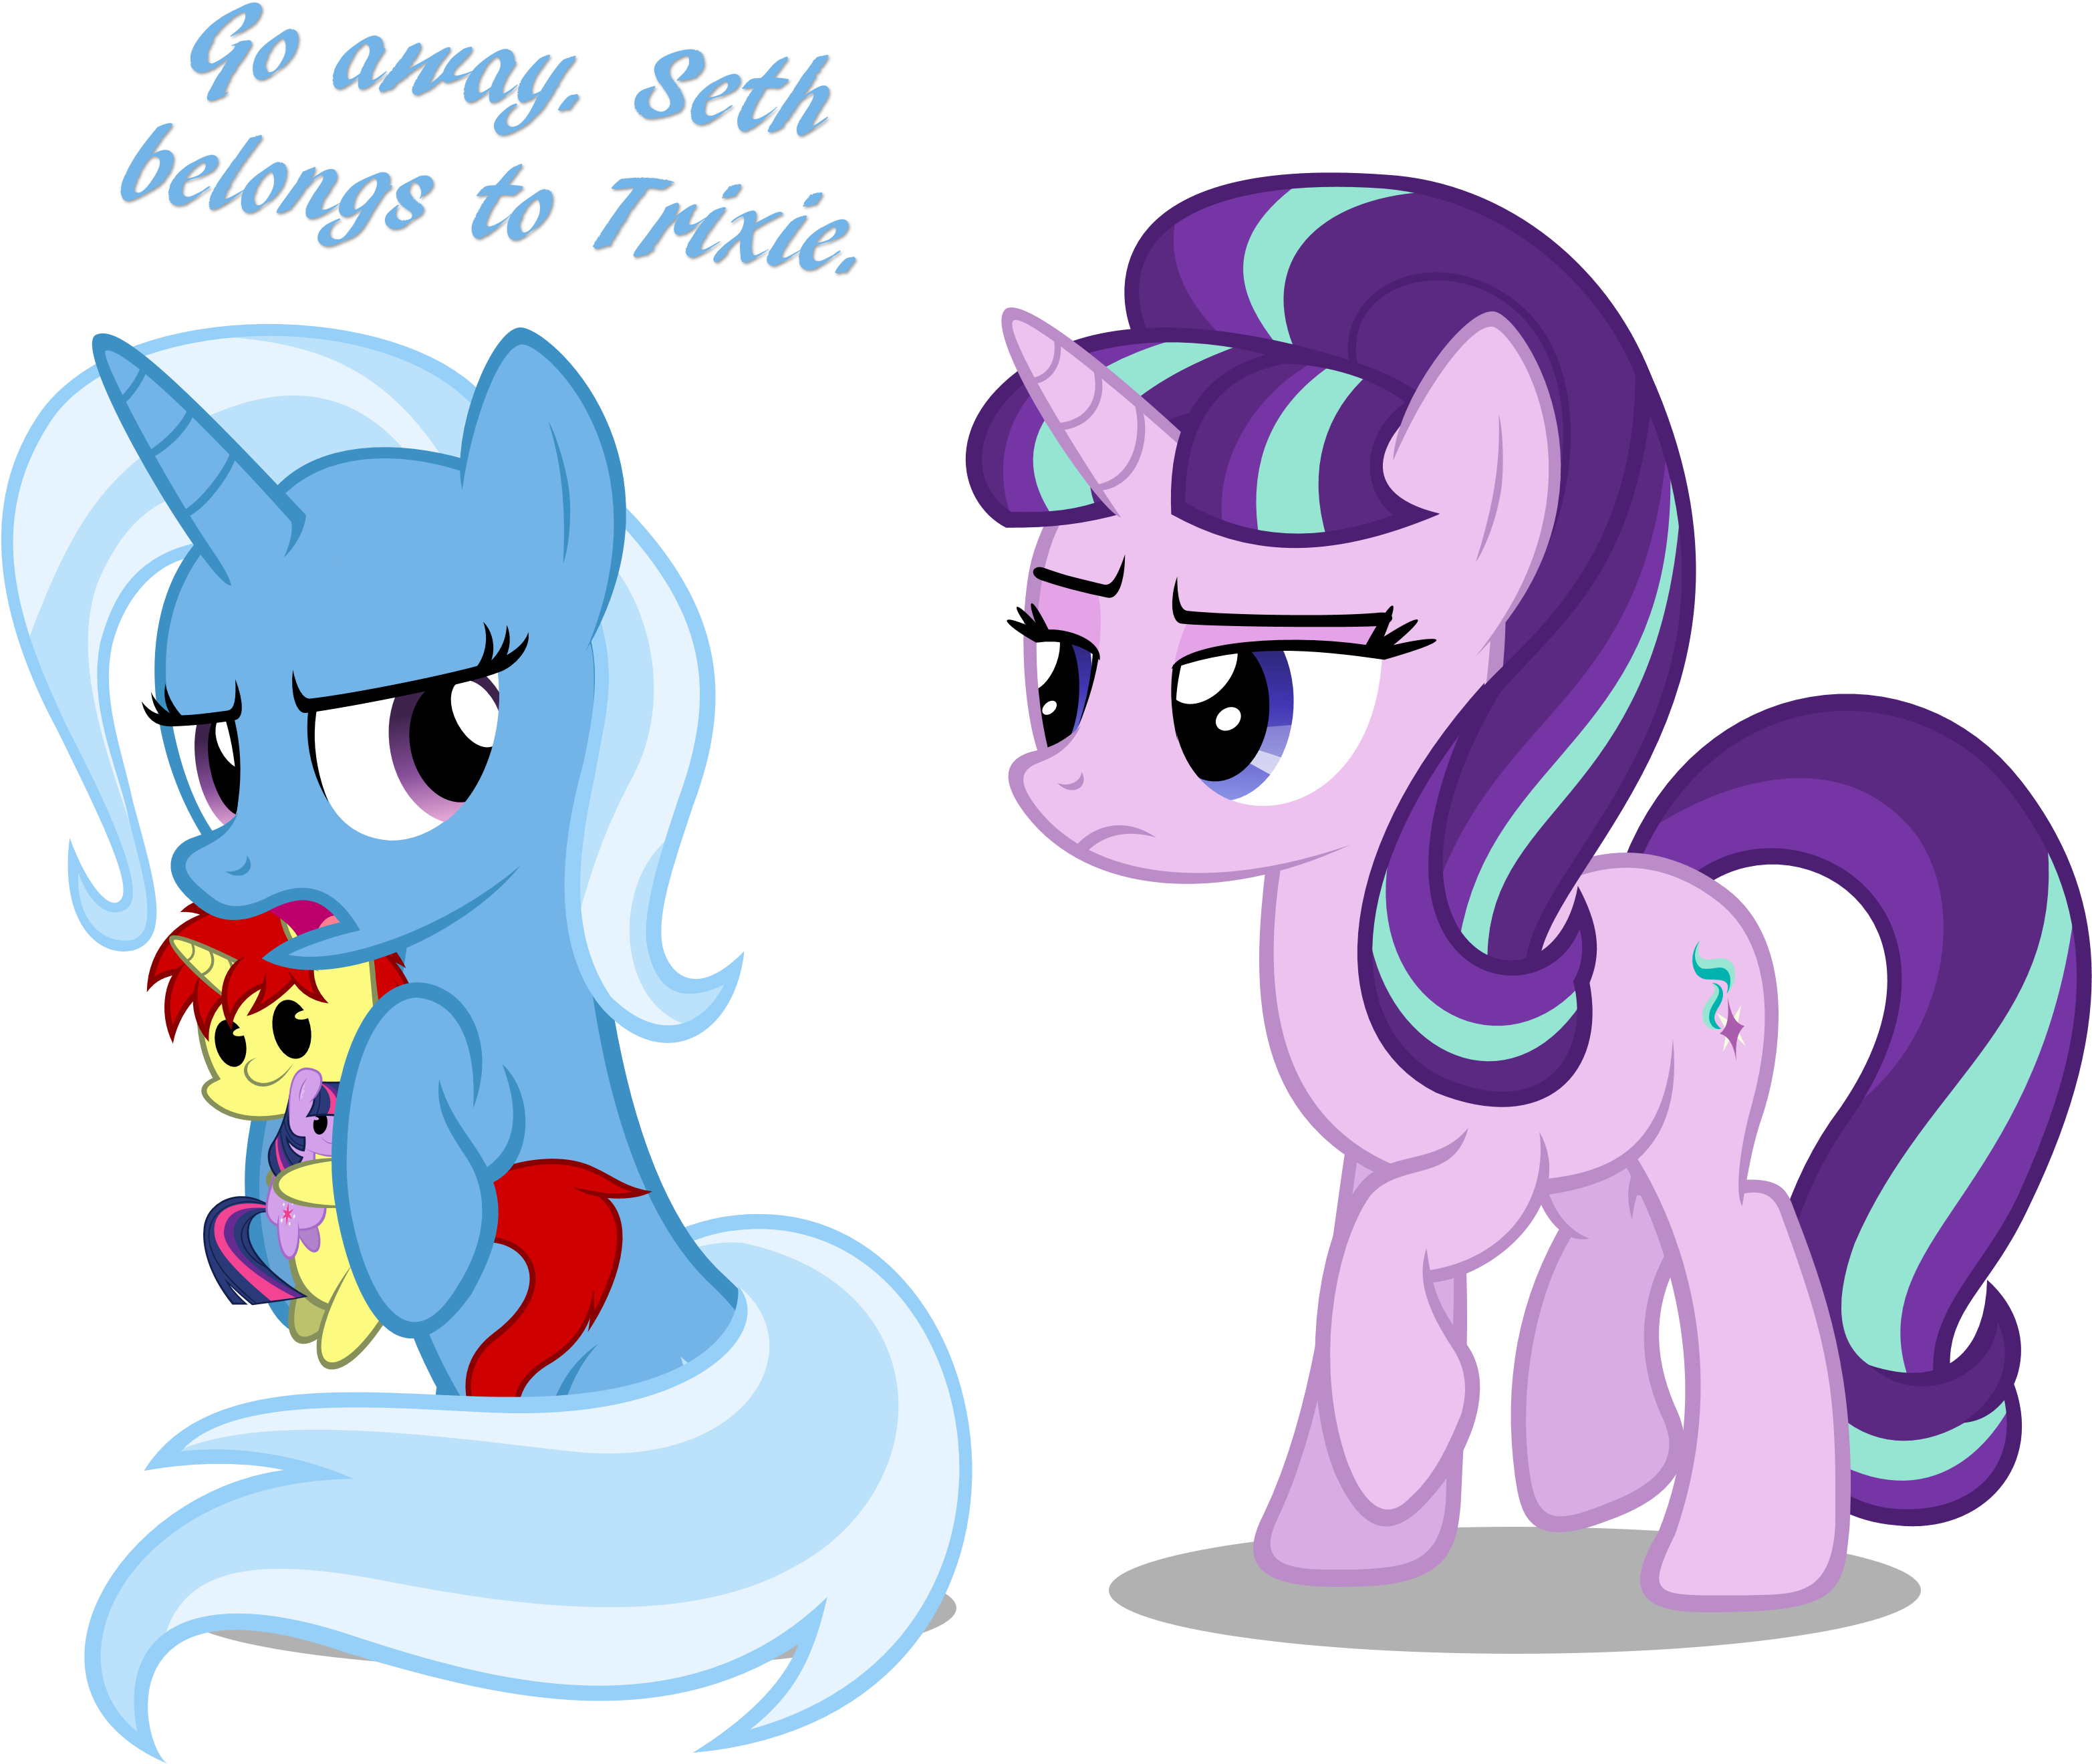 He Is Trixie's By Zacatron94 He Is Trixie's By Zacatron94 - Trixie And Starlight Glimmer (3129x2747)